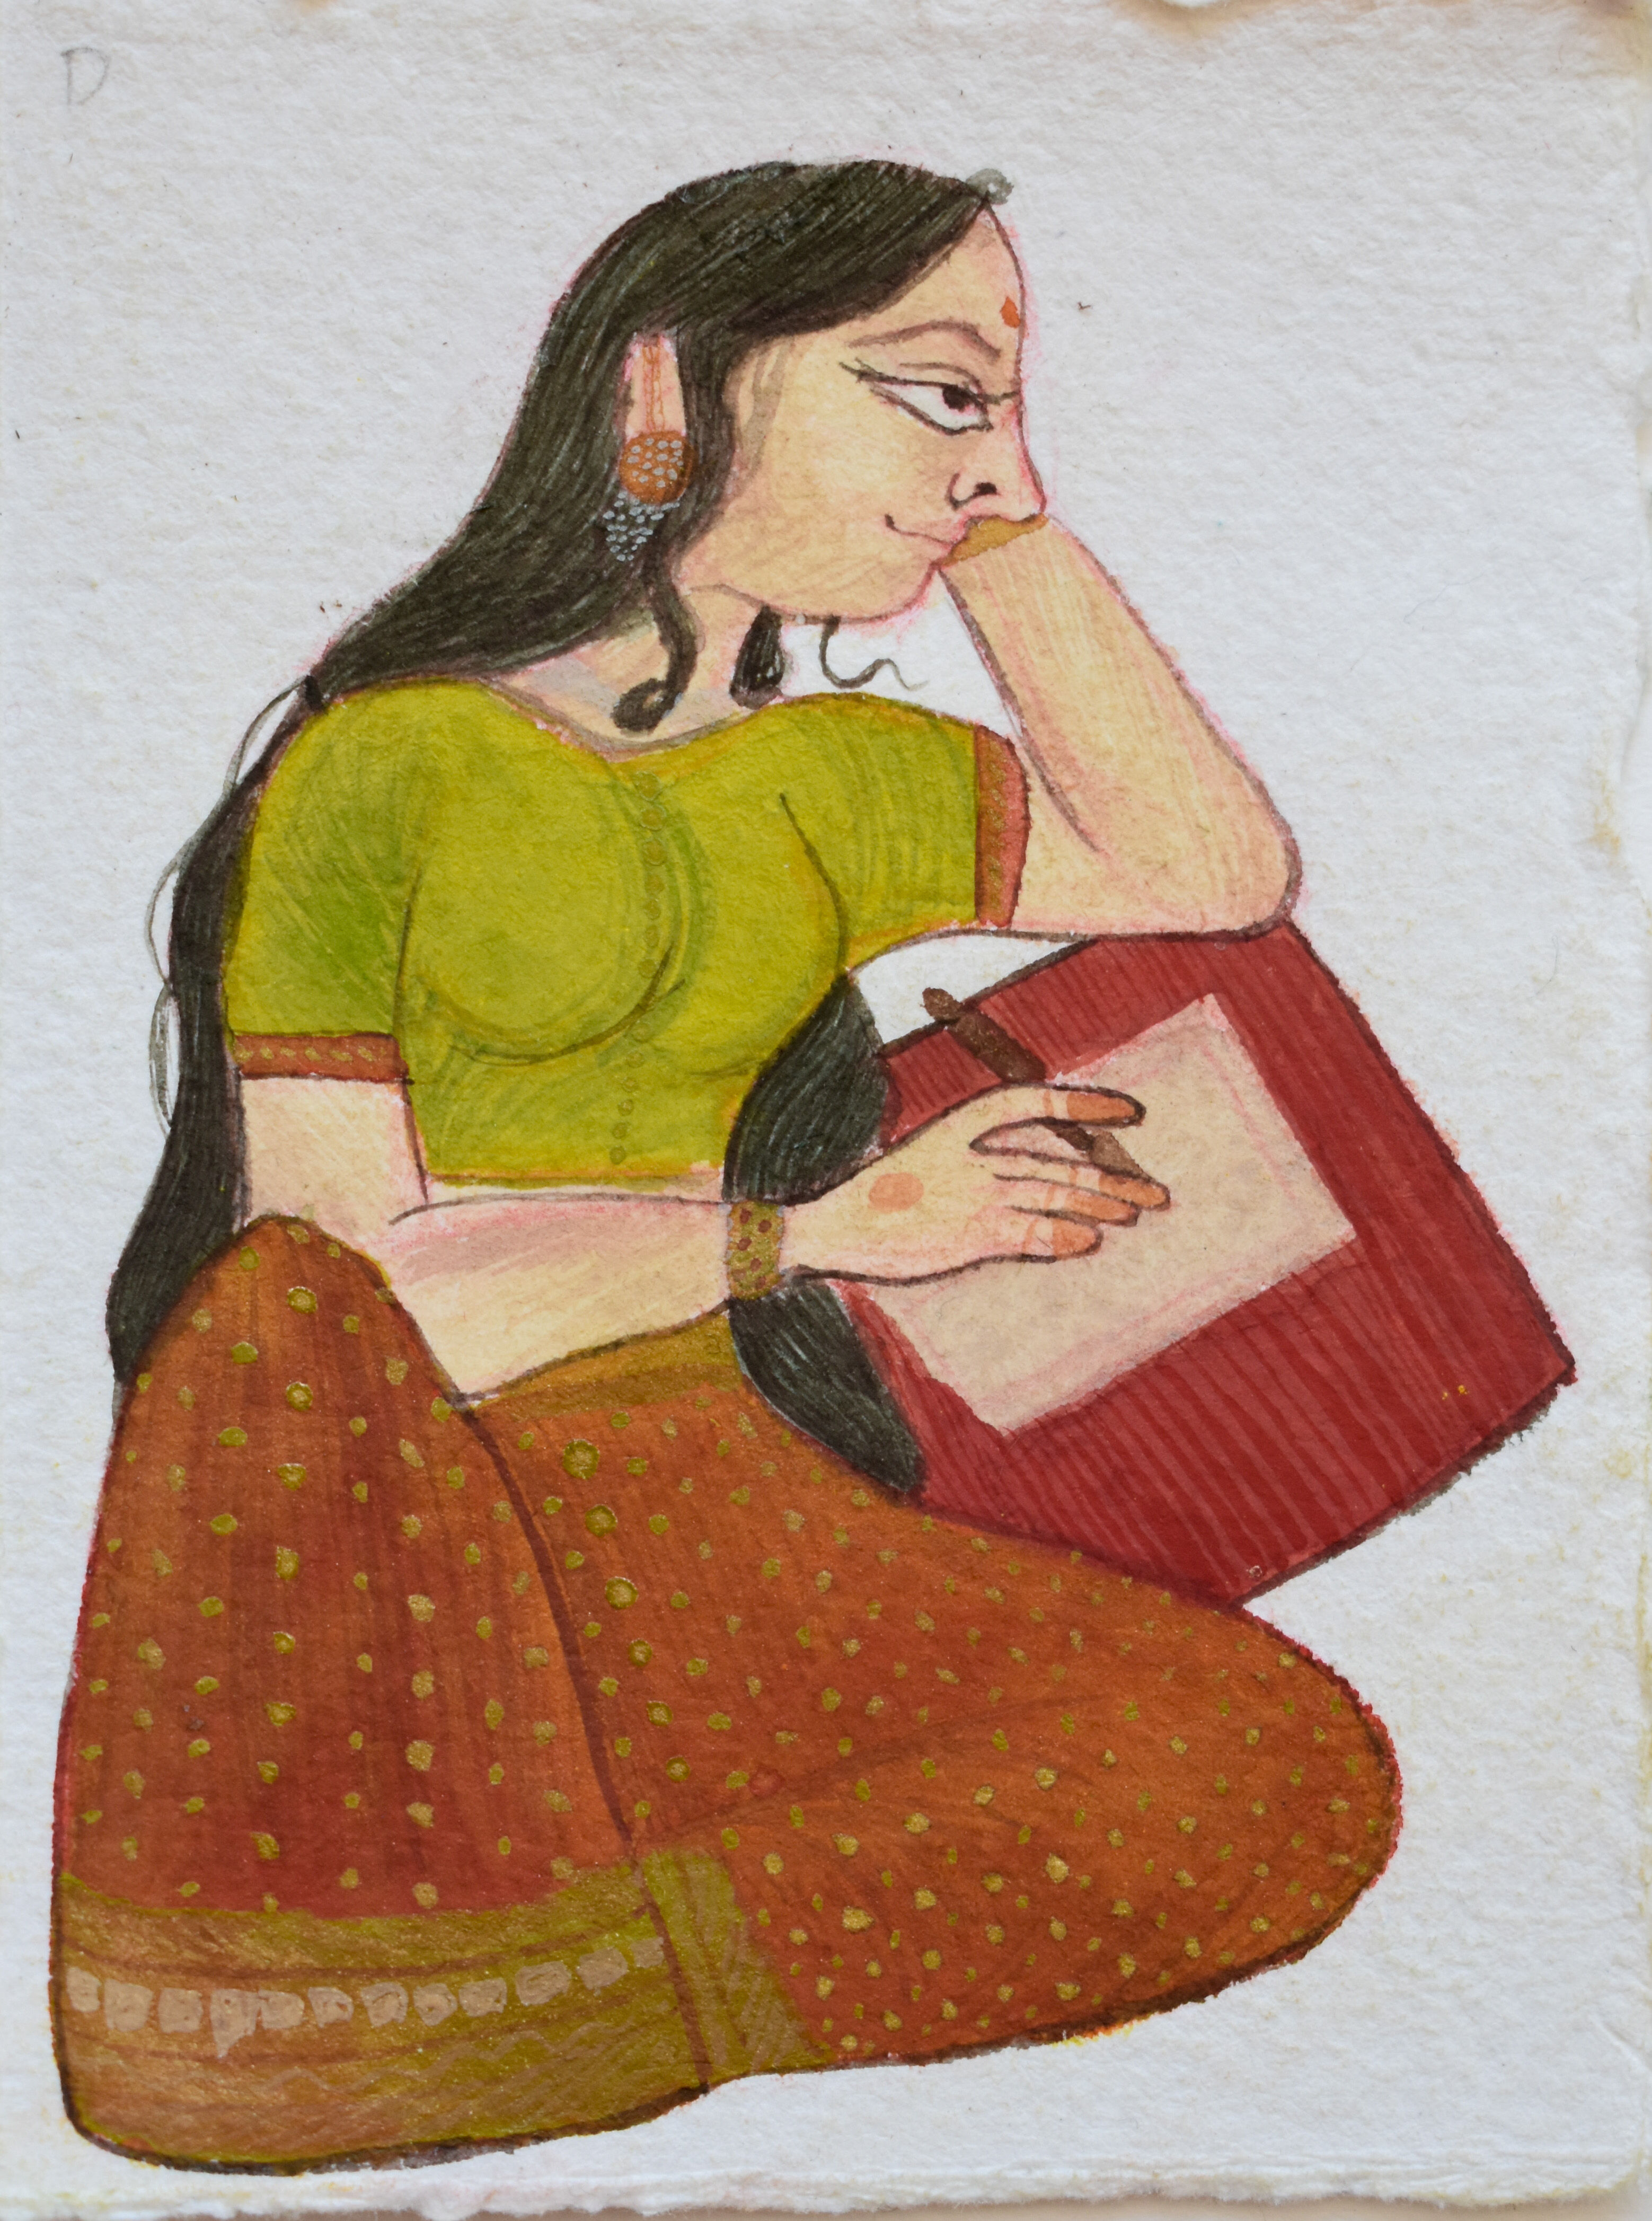 Hand-painted illustration of a woman dressed in traditional Indian attire, lost in thought with a book in hand.